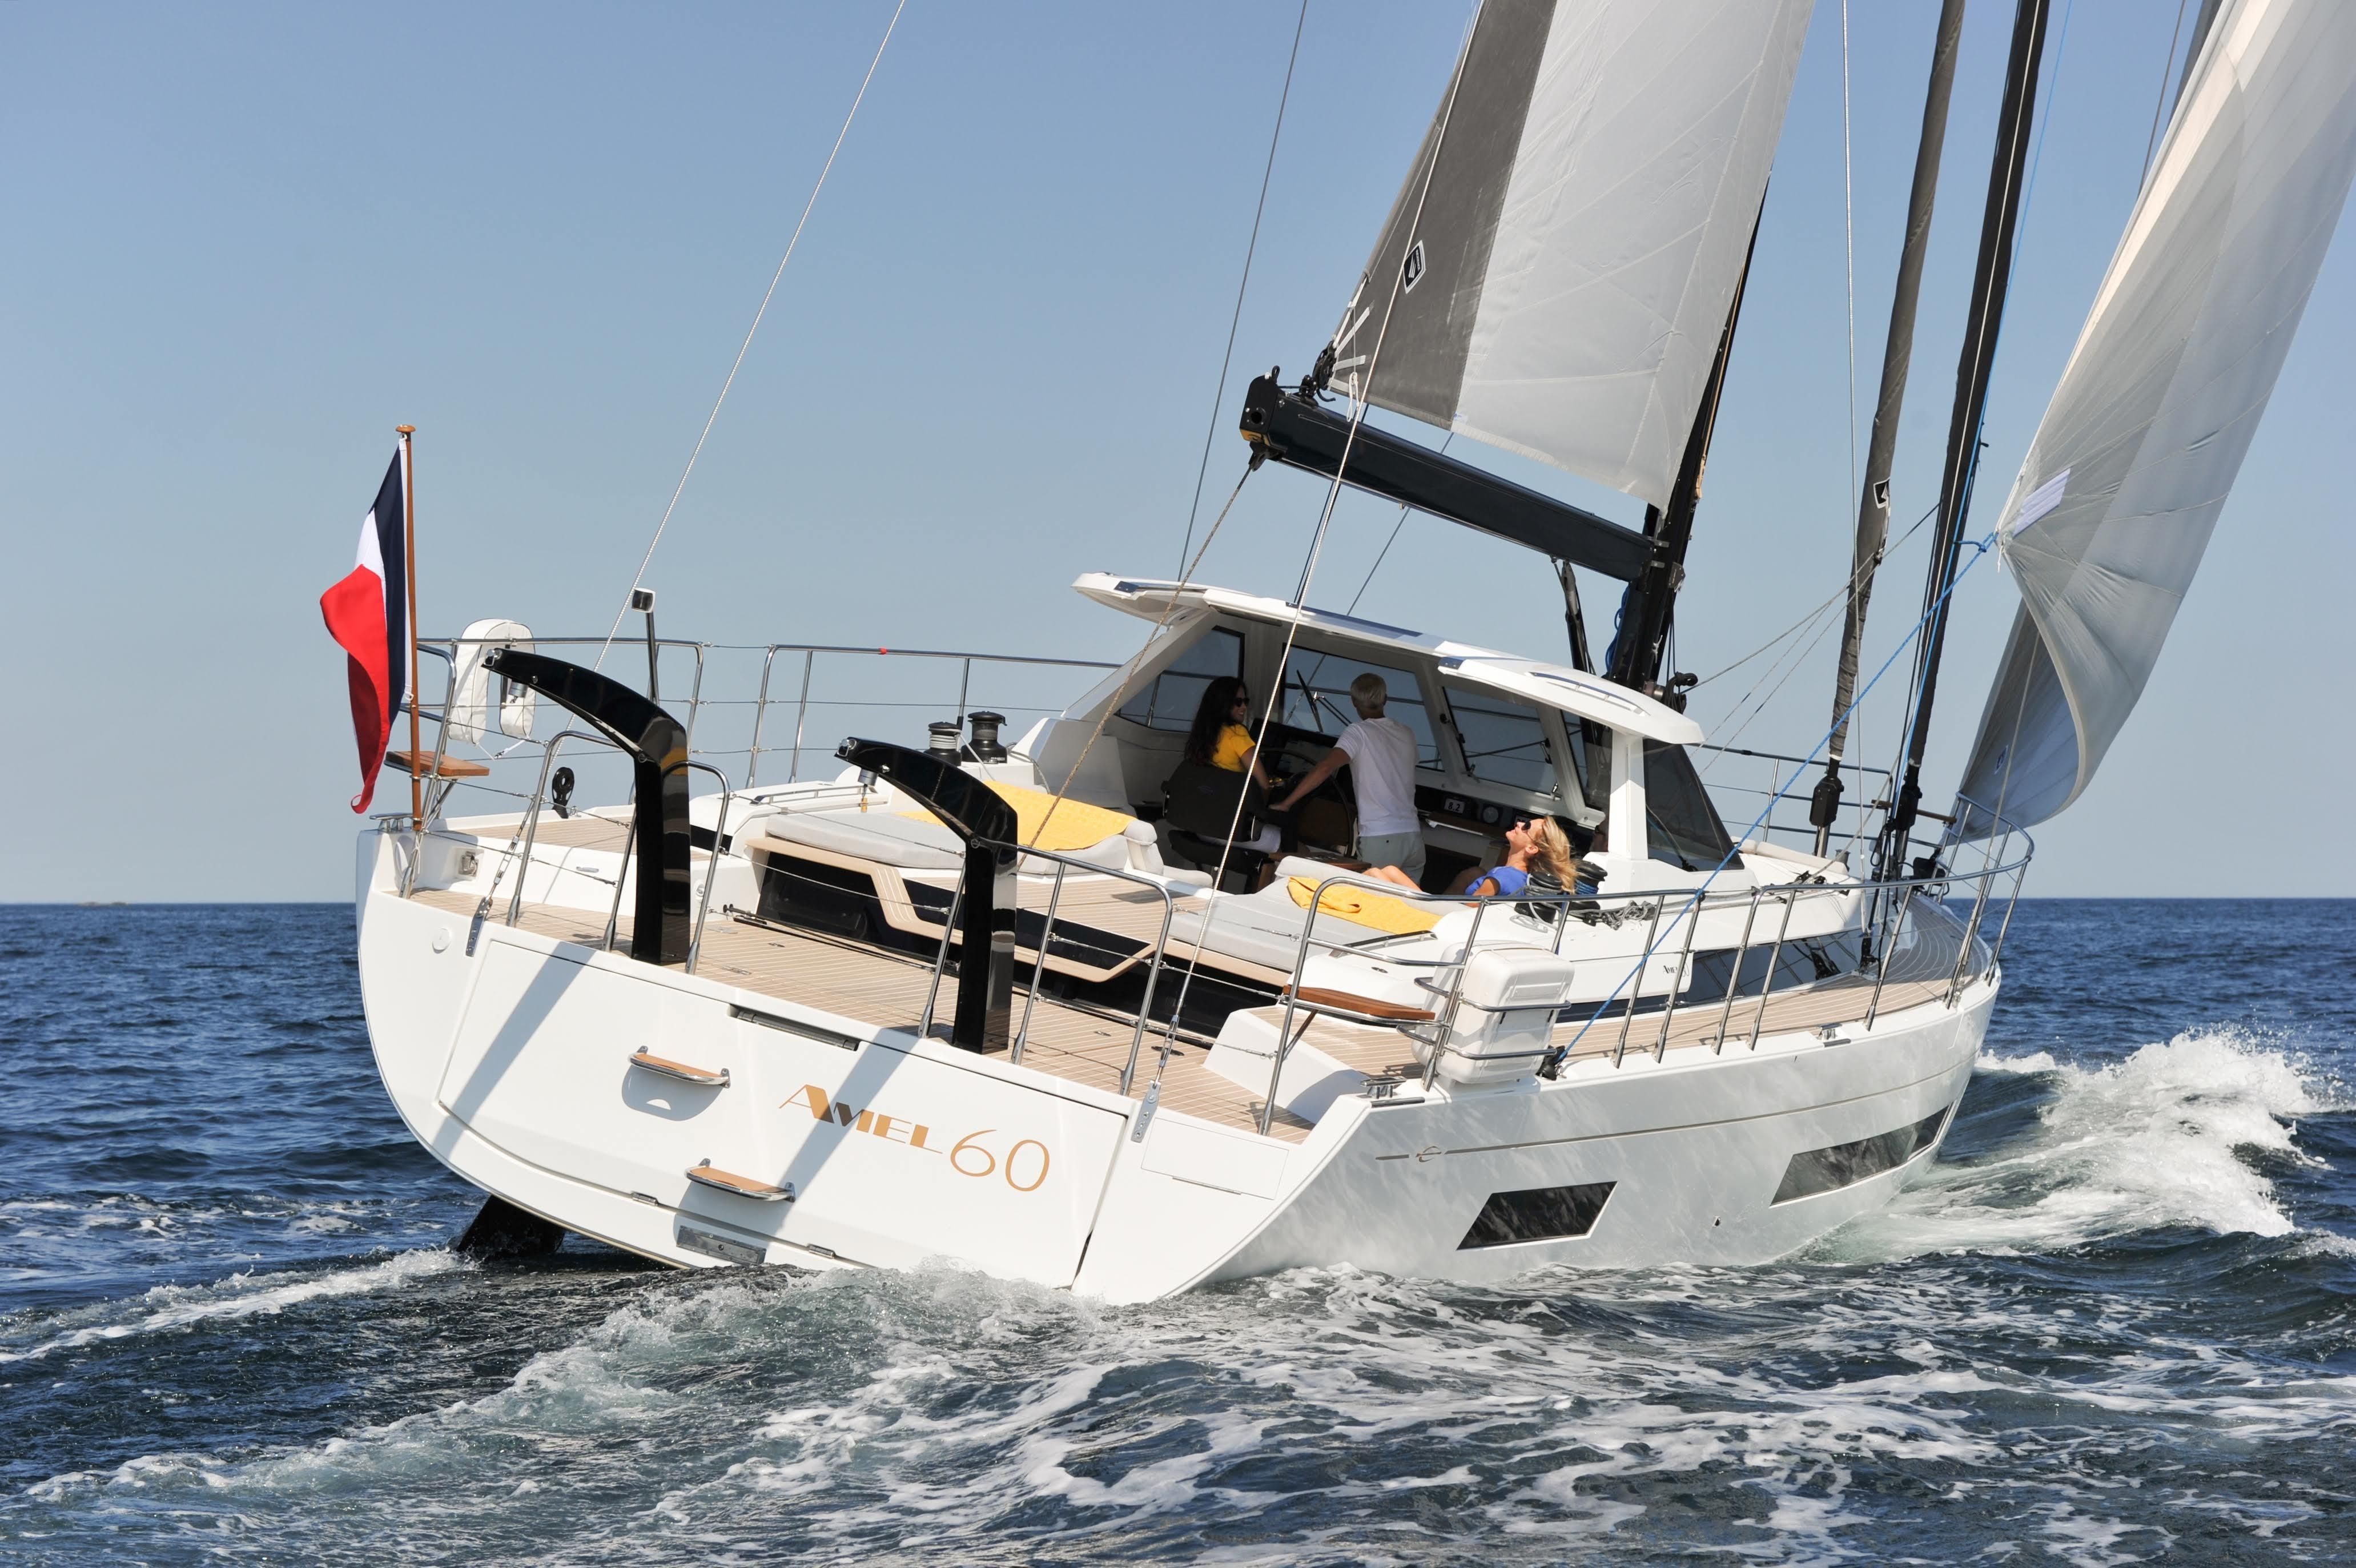 amel yachts for sale